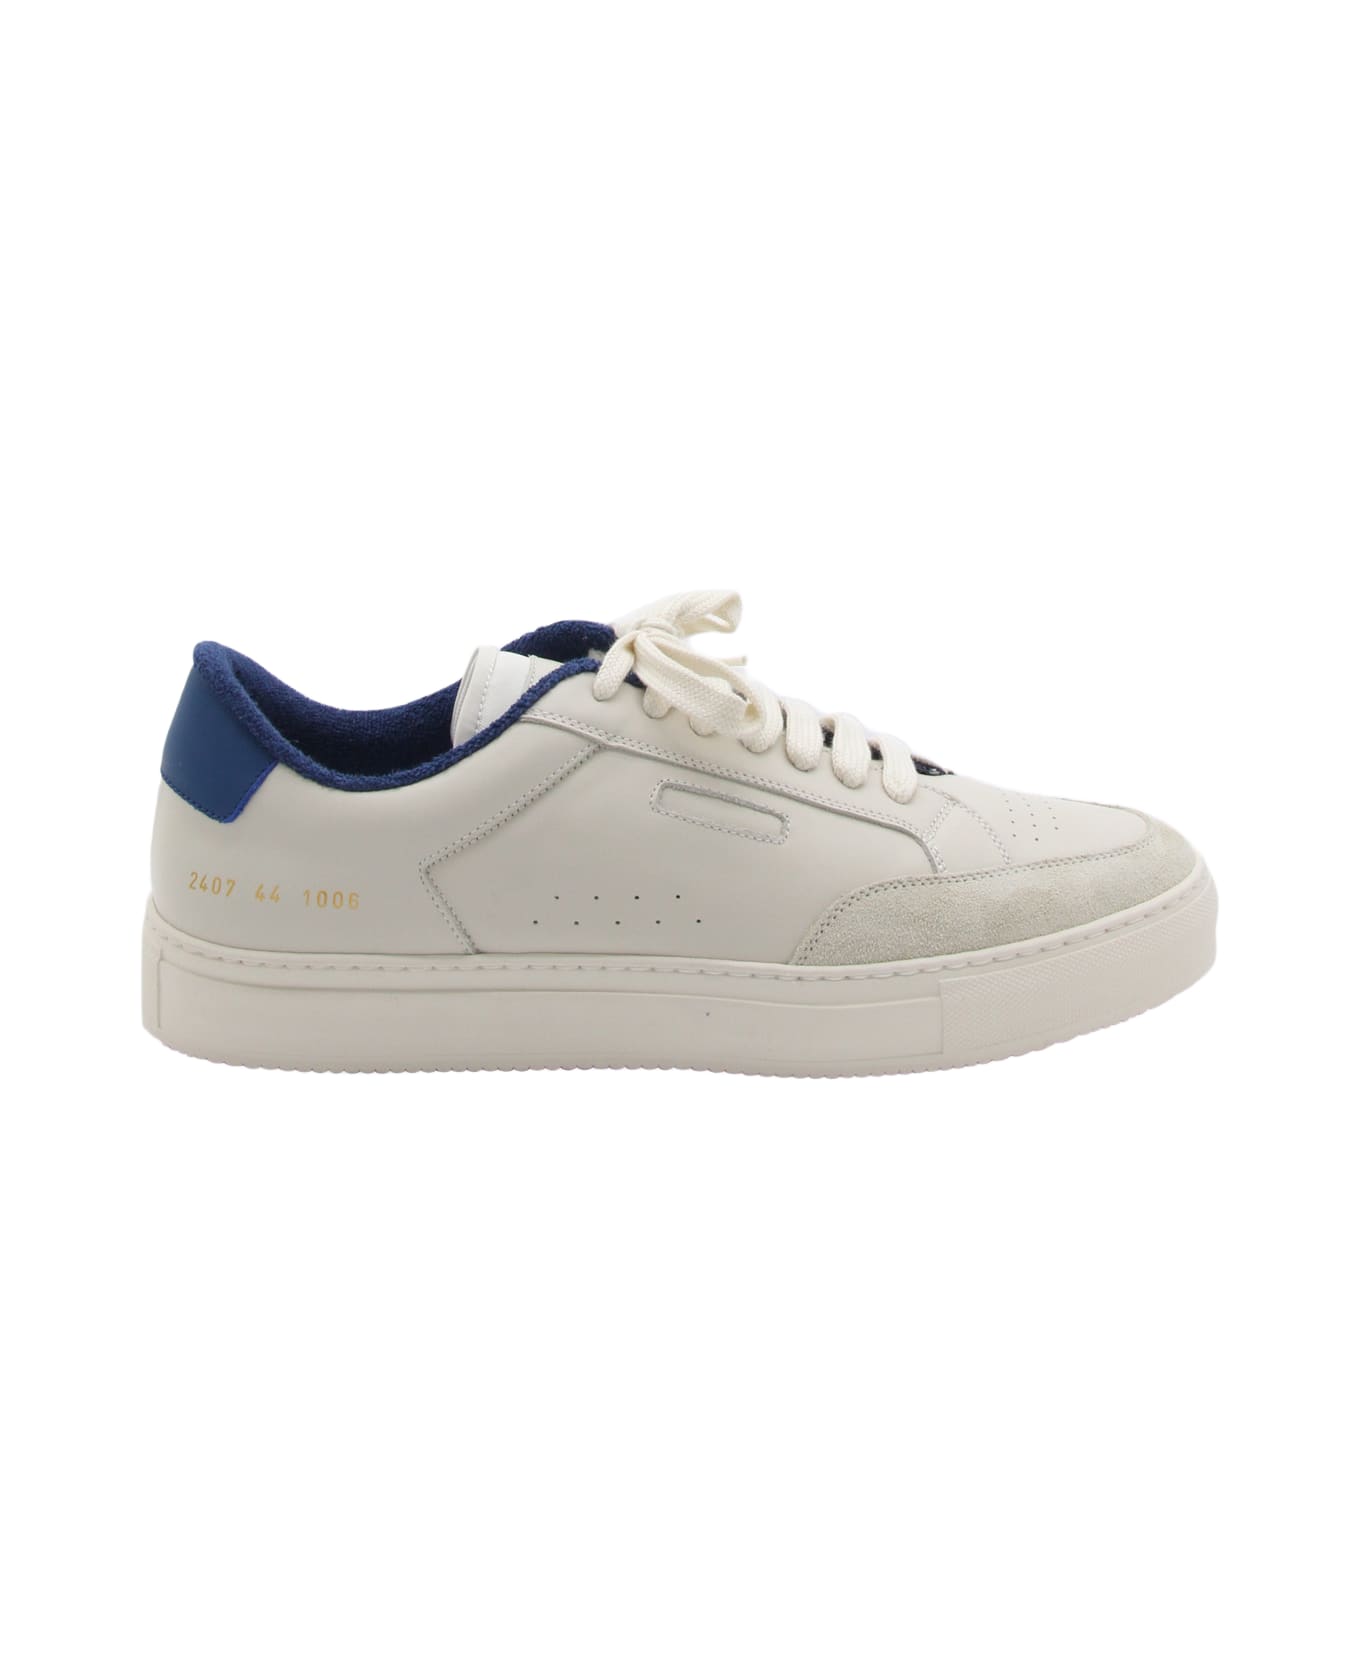 Common Projects White And Blue Leather Sneakers - White